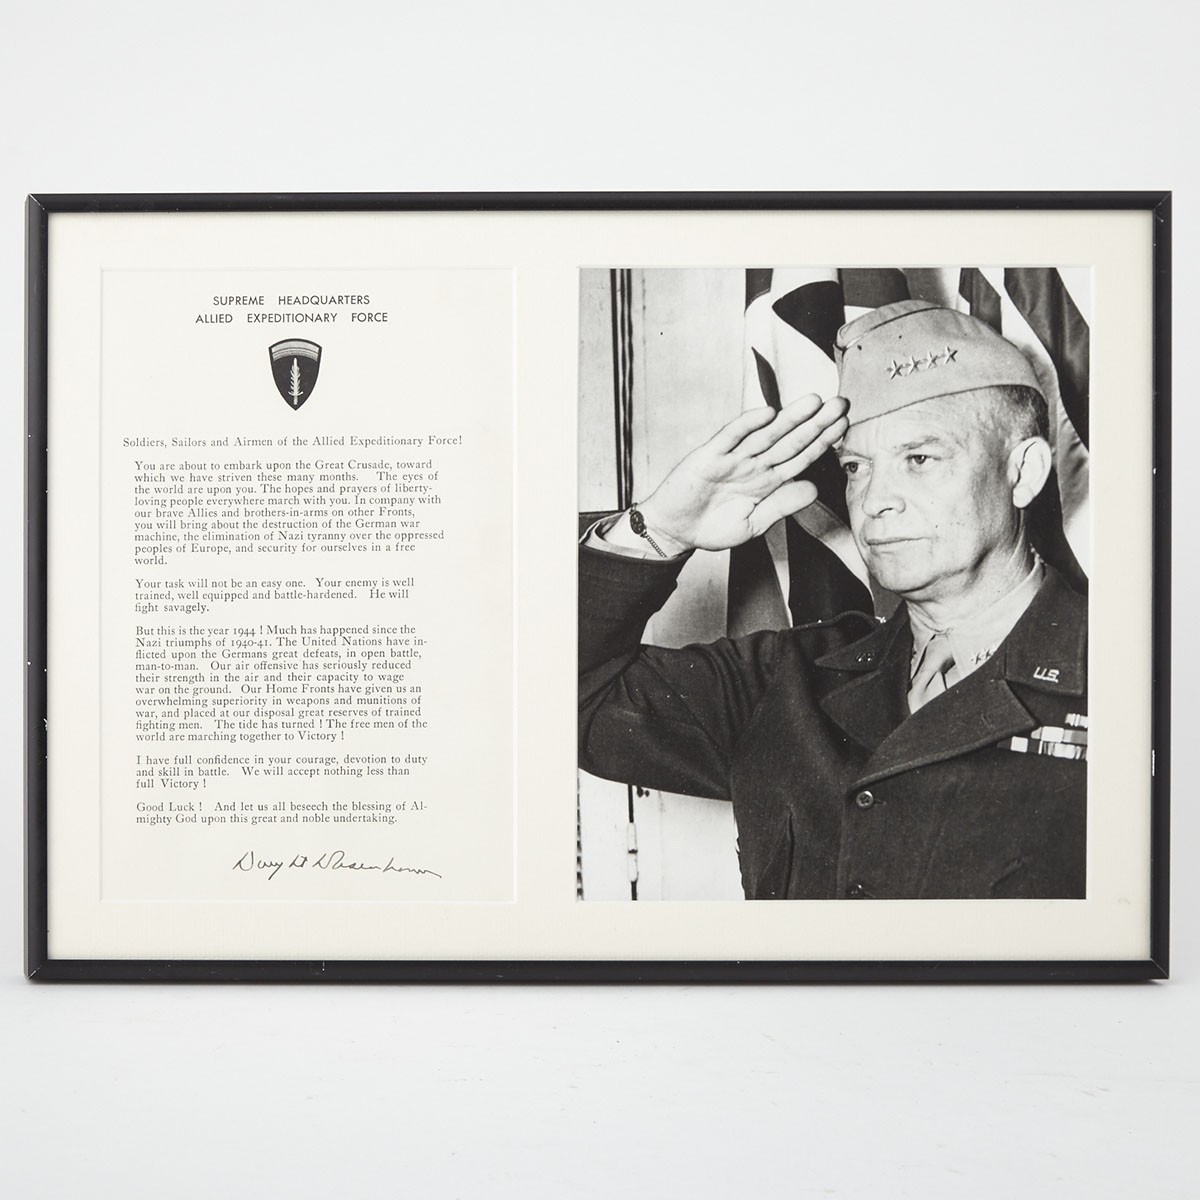 Dwight D. Eisenhower’s ‘Order of the Day’ Autographed D-Day Address to Soldiers, Sailors, and Airmen of the Allied Expeditionary Force, June 6, 1944